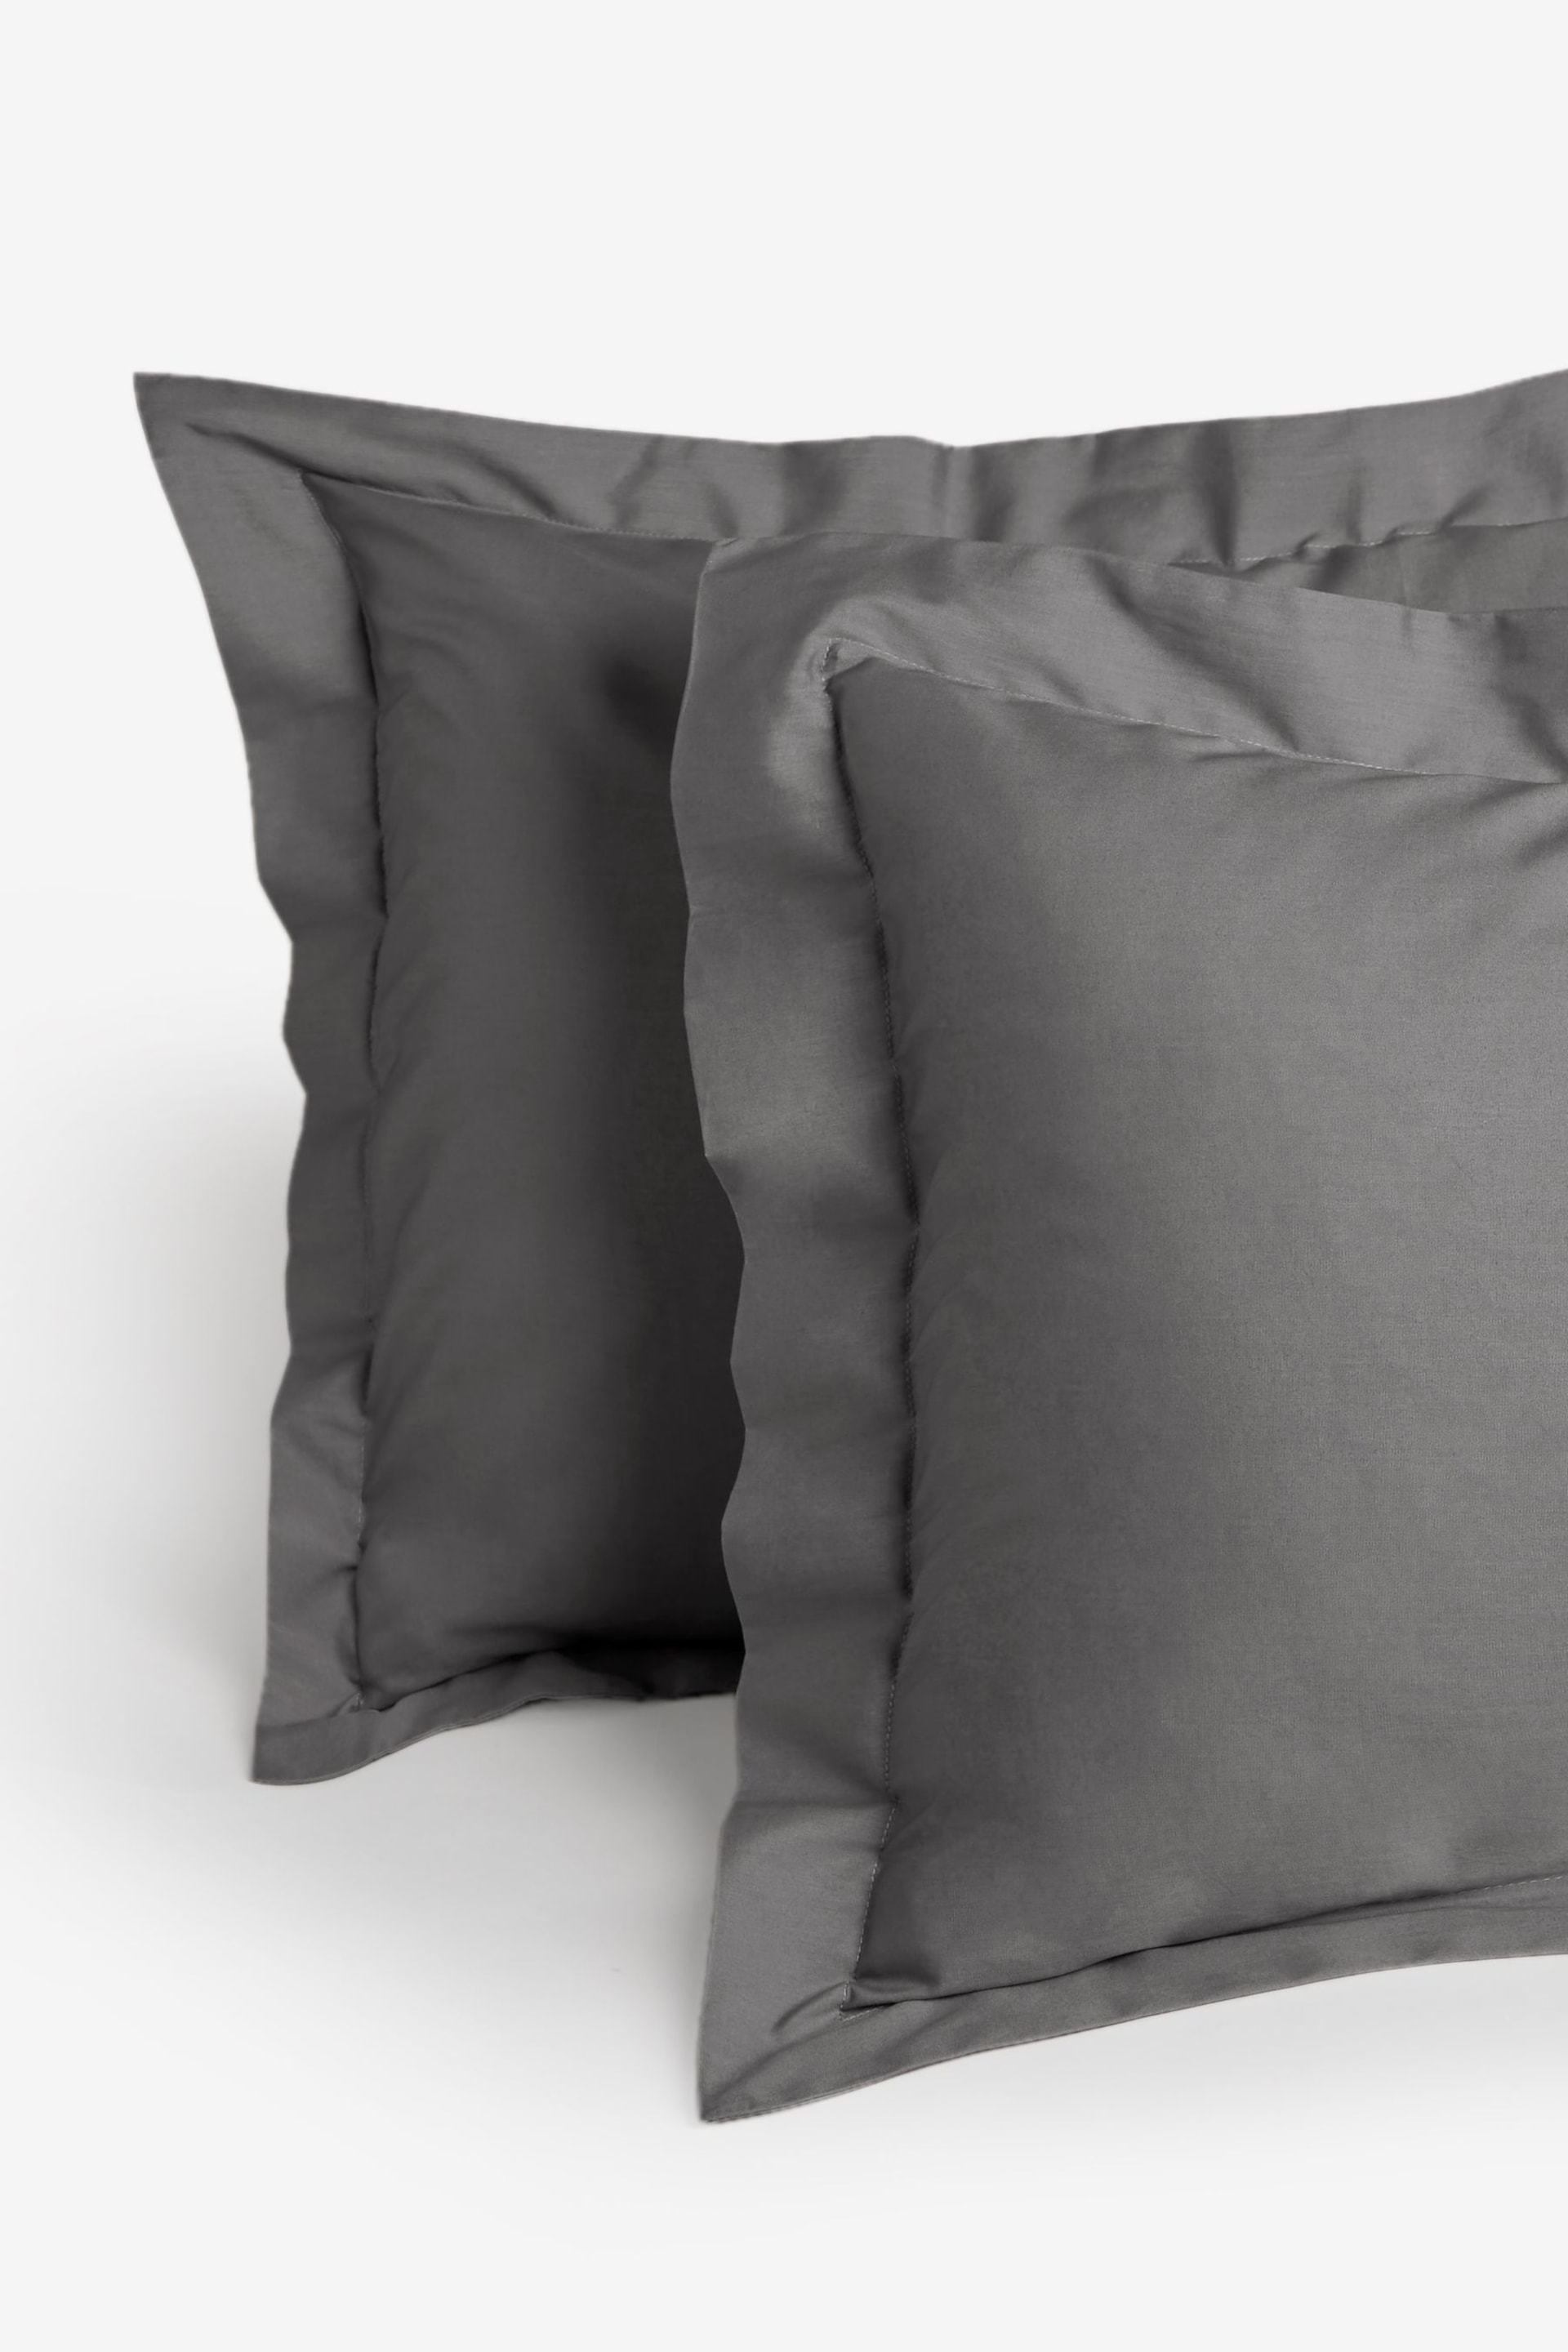 Charcoal Grey Oxford Edge Cotton Rich Oxford Duvet Cover and Pillowcase Set - Image 3 of 4